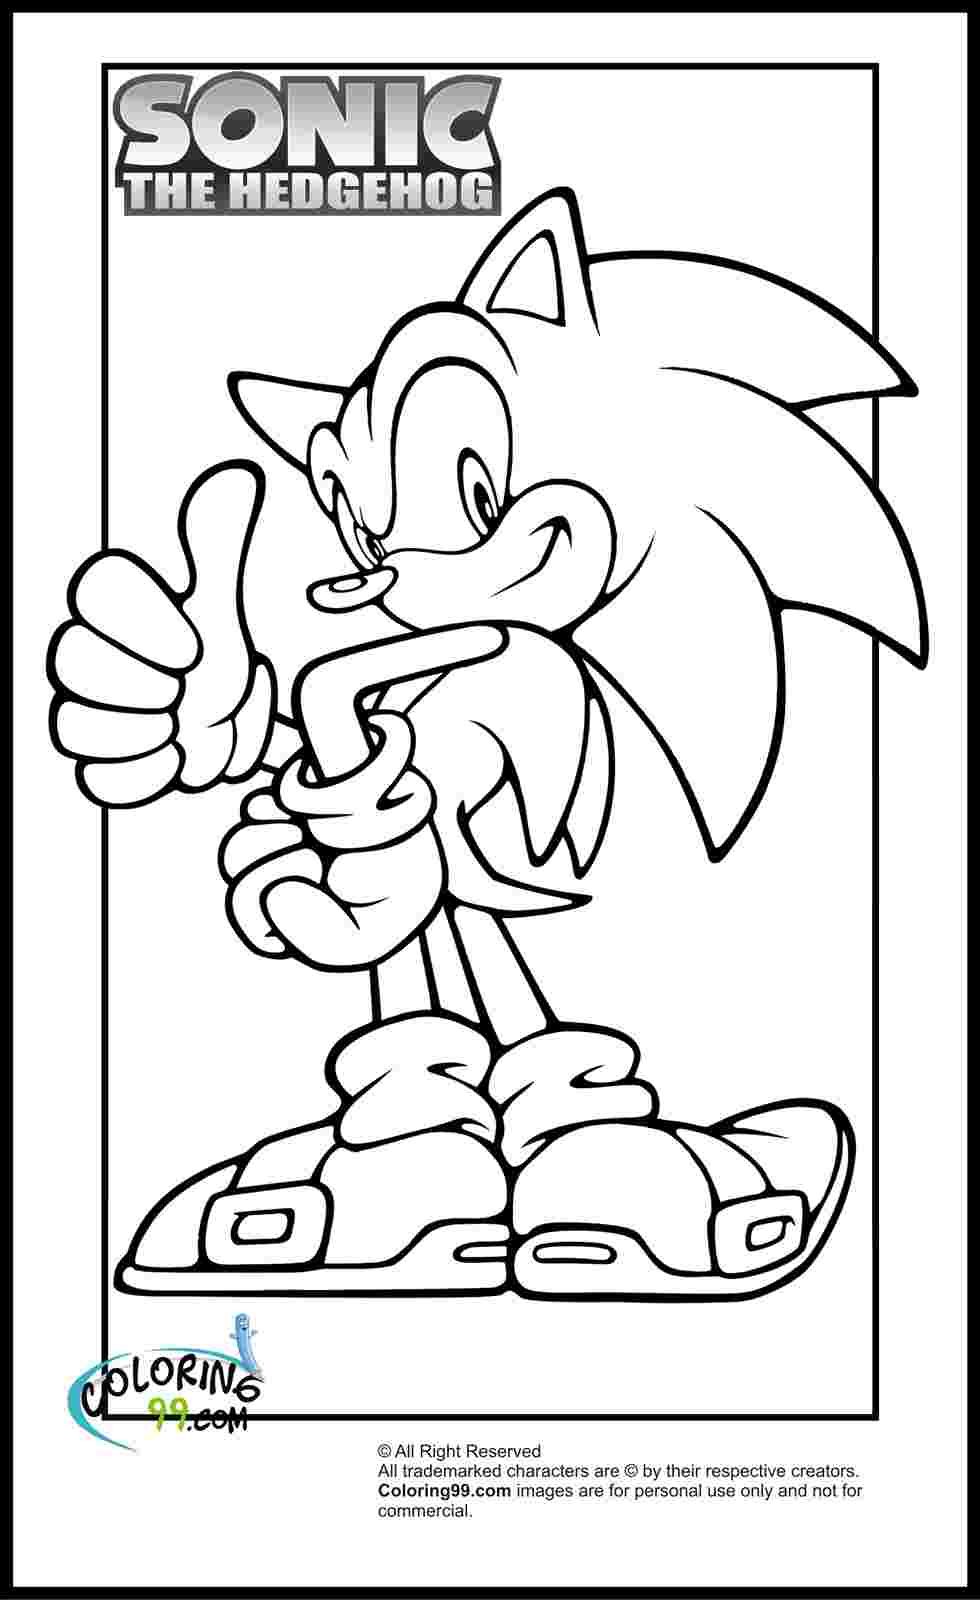 Coloring Festival Sonic X Characters Coloring Pages  More Than 20 ...